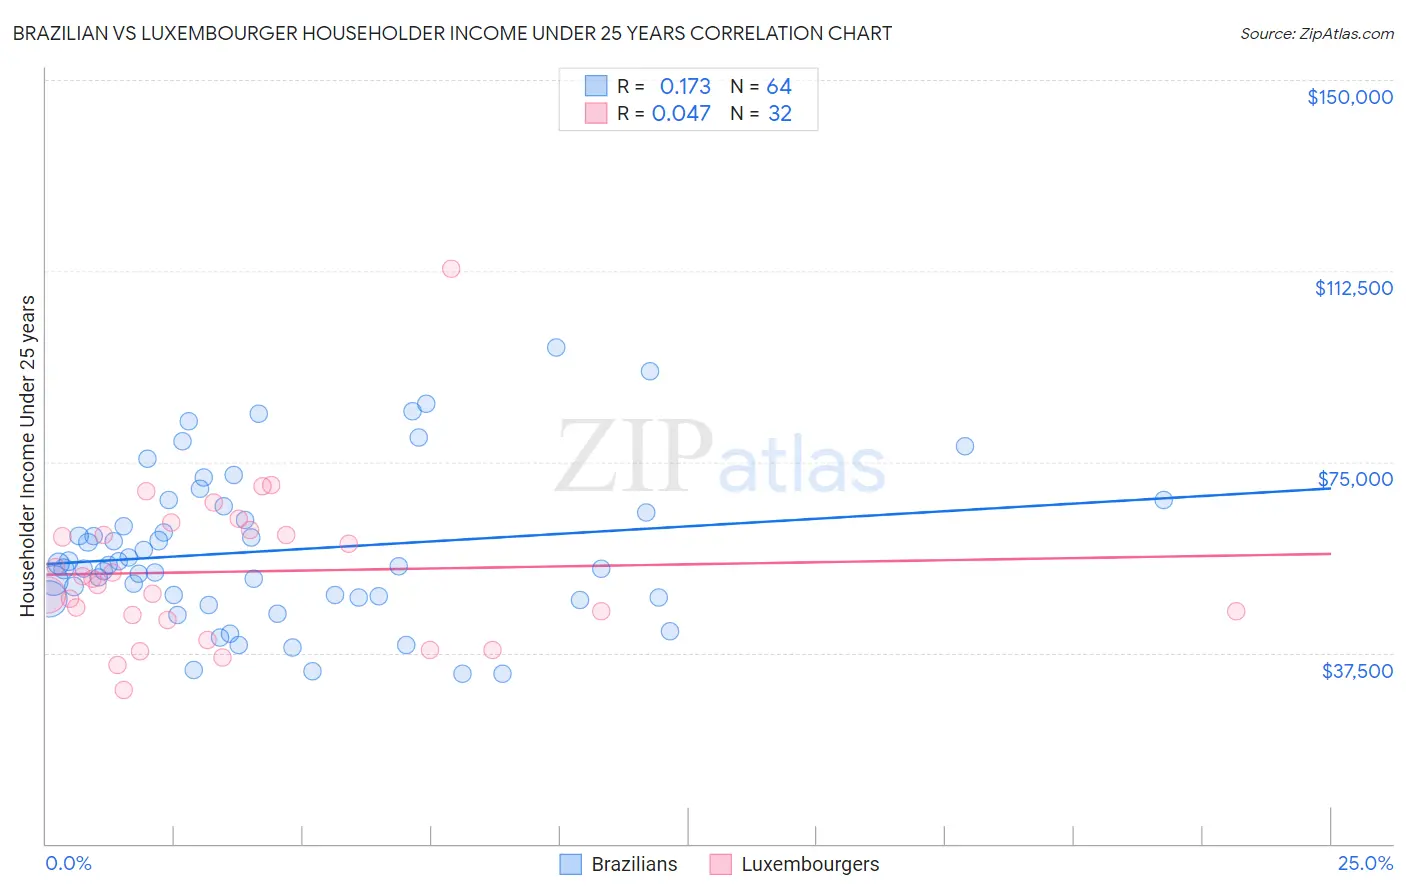 Brazilian vs Luxembourger Householder Income Under 25 years